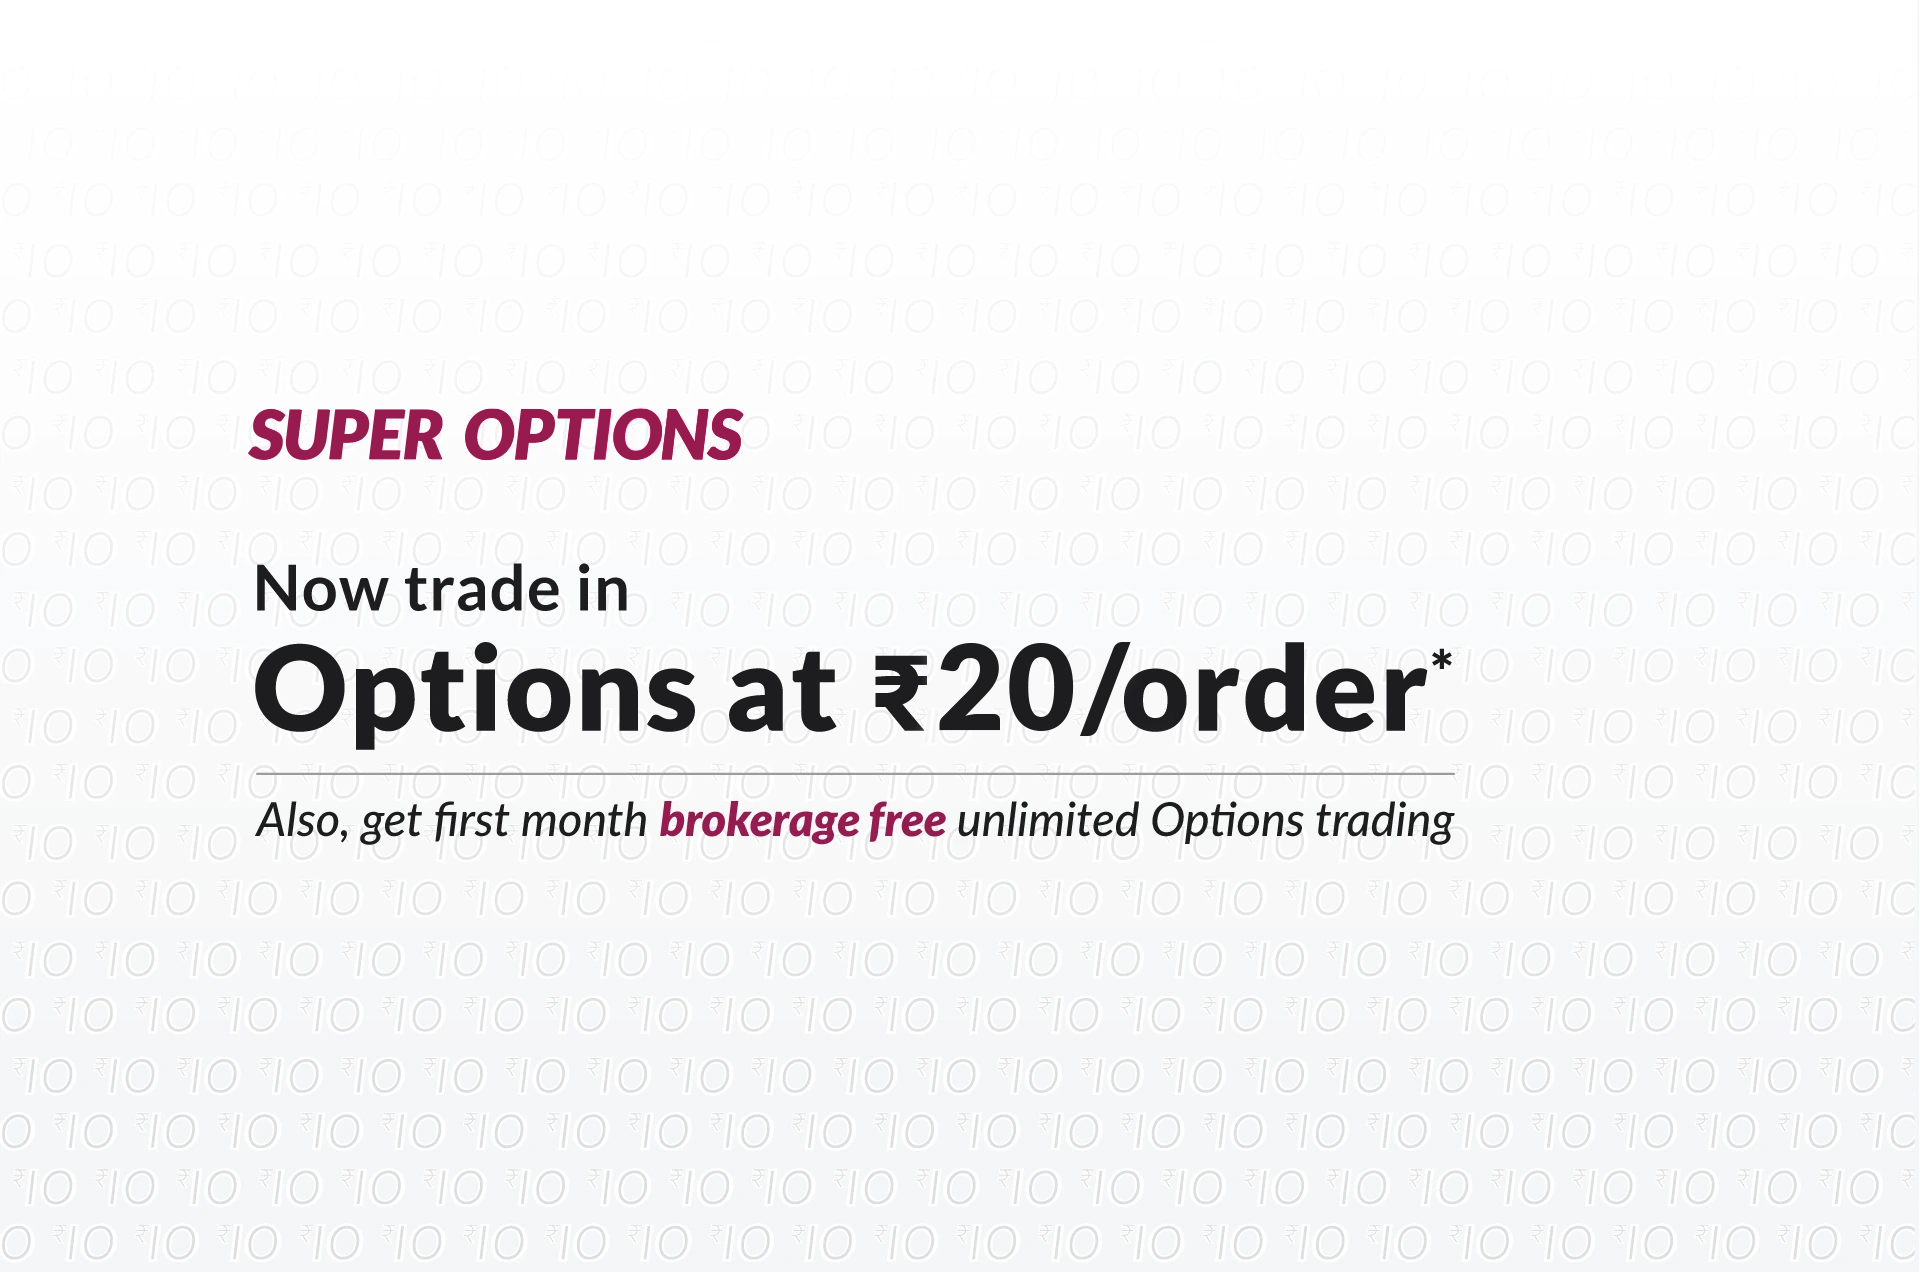 Super Options Now trade in Options at ₹ 10/order* Also, get first month brokerage free unlimited  Options trading